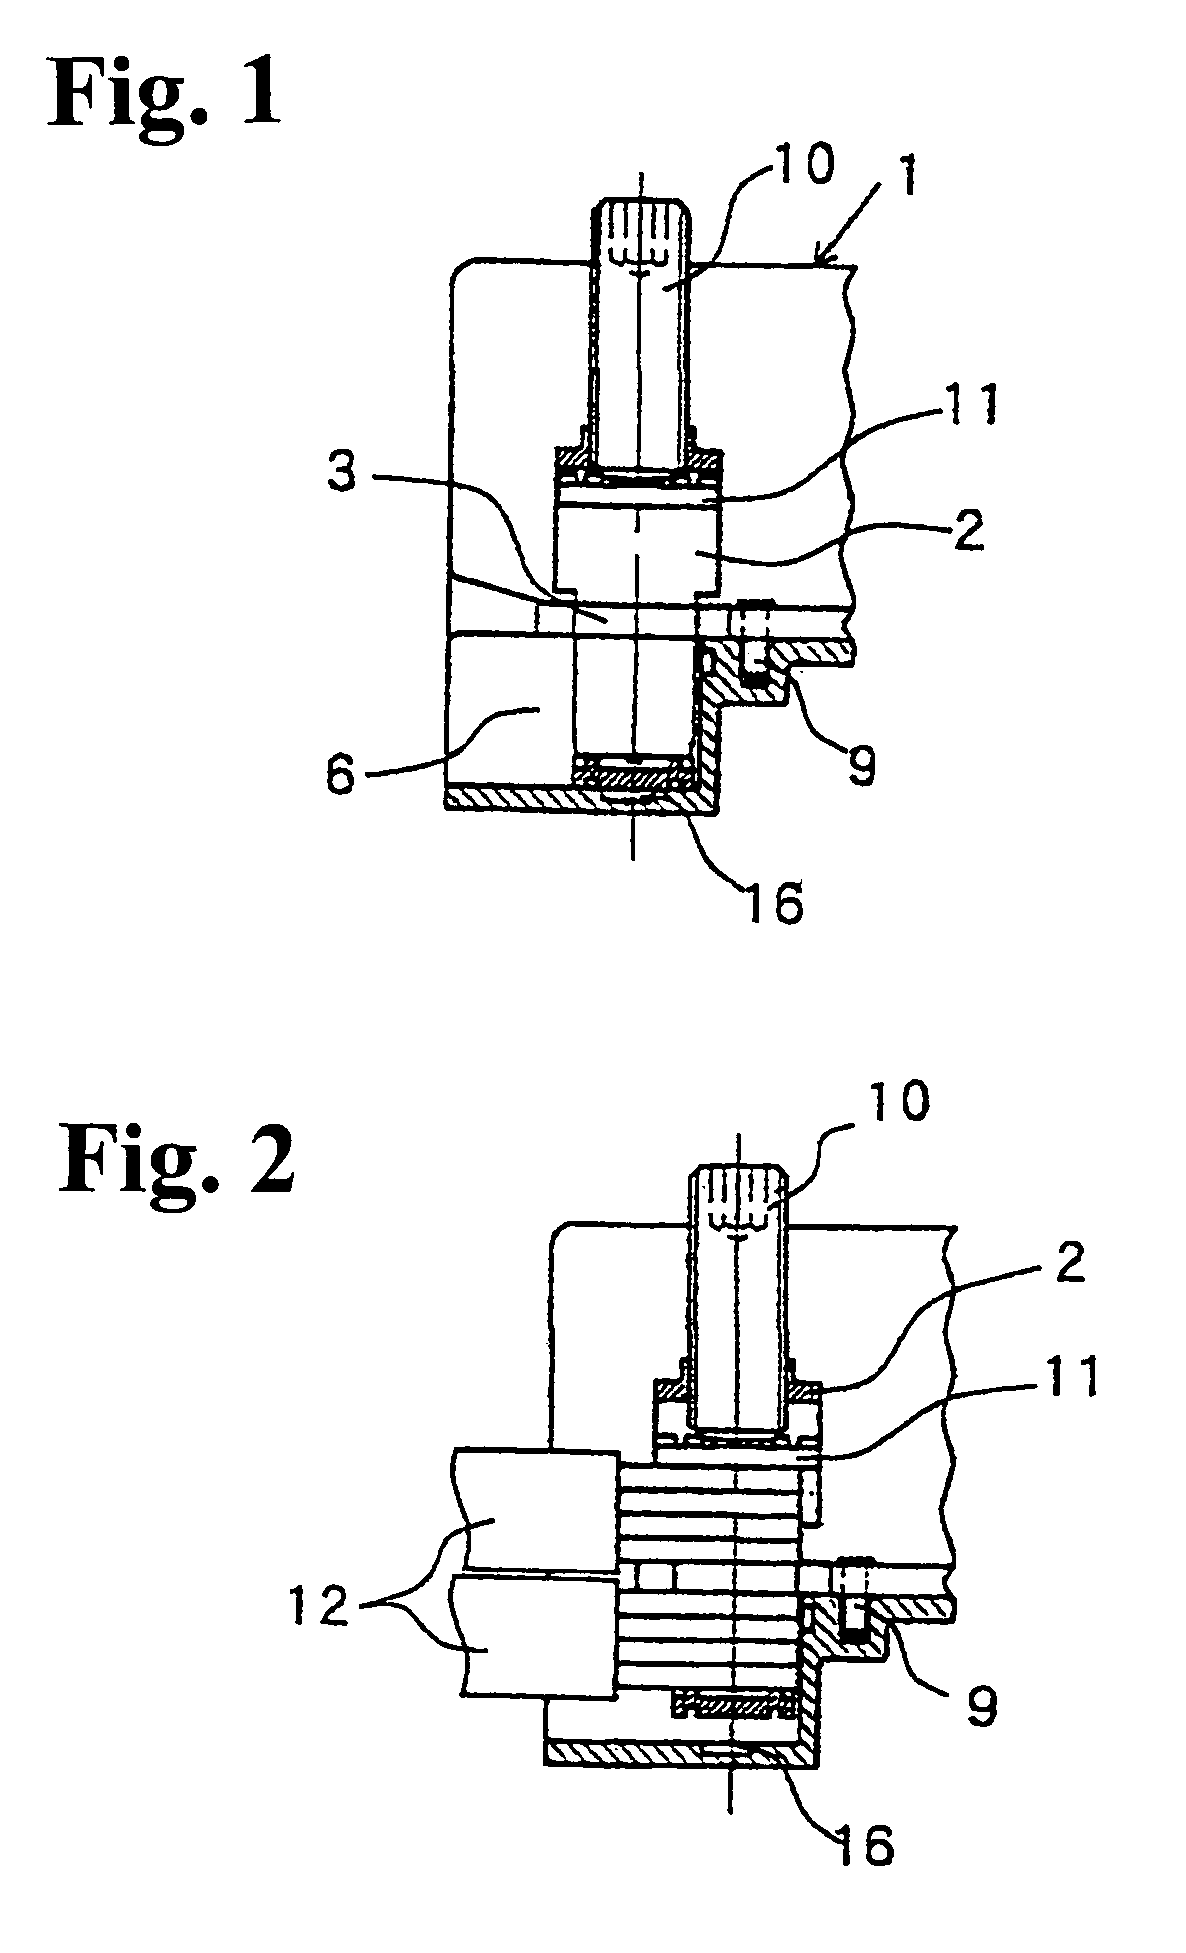 Terminal device of electrical apparatus